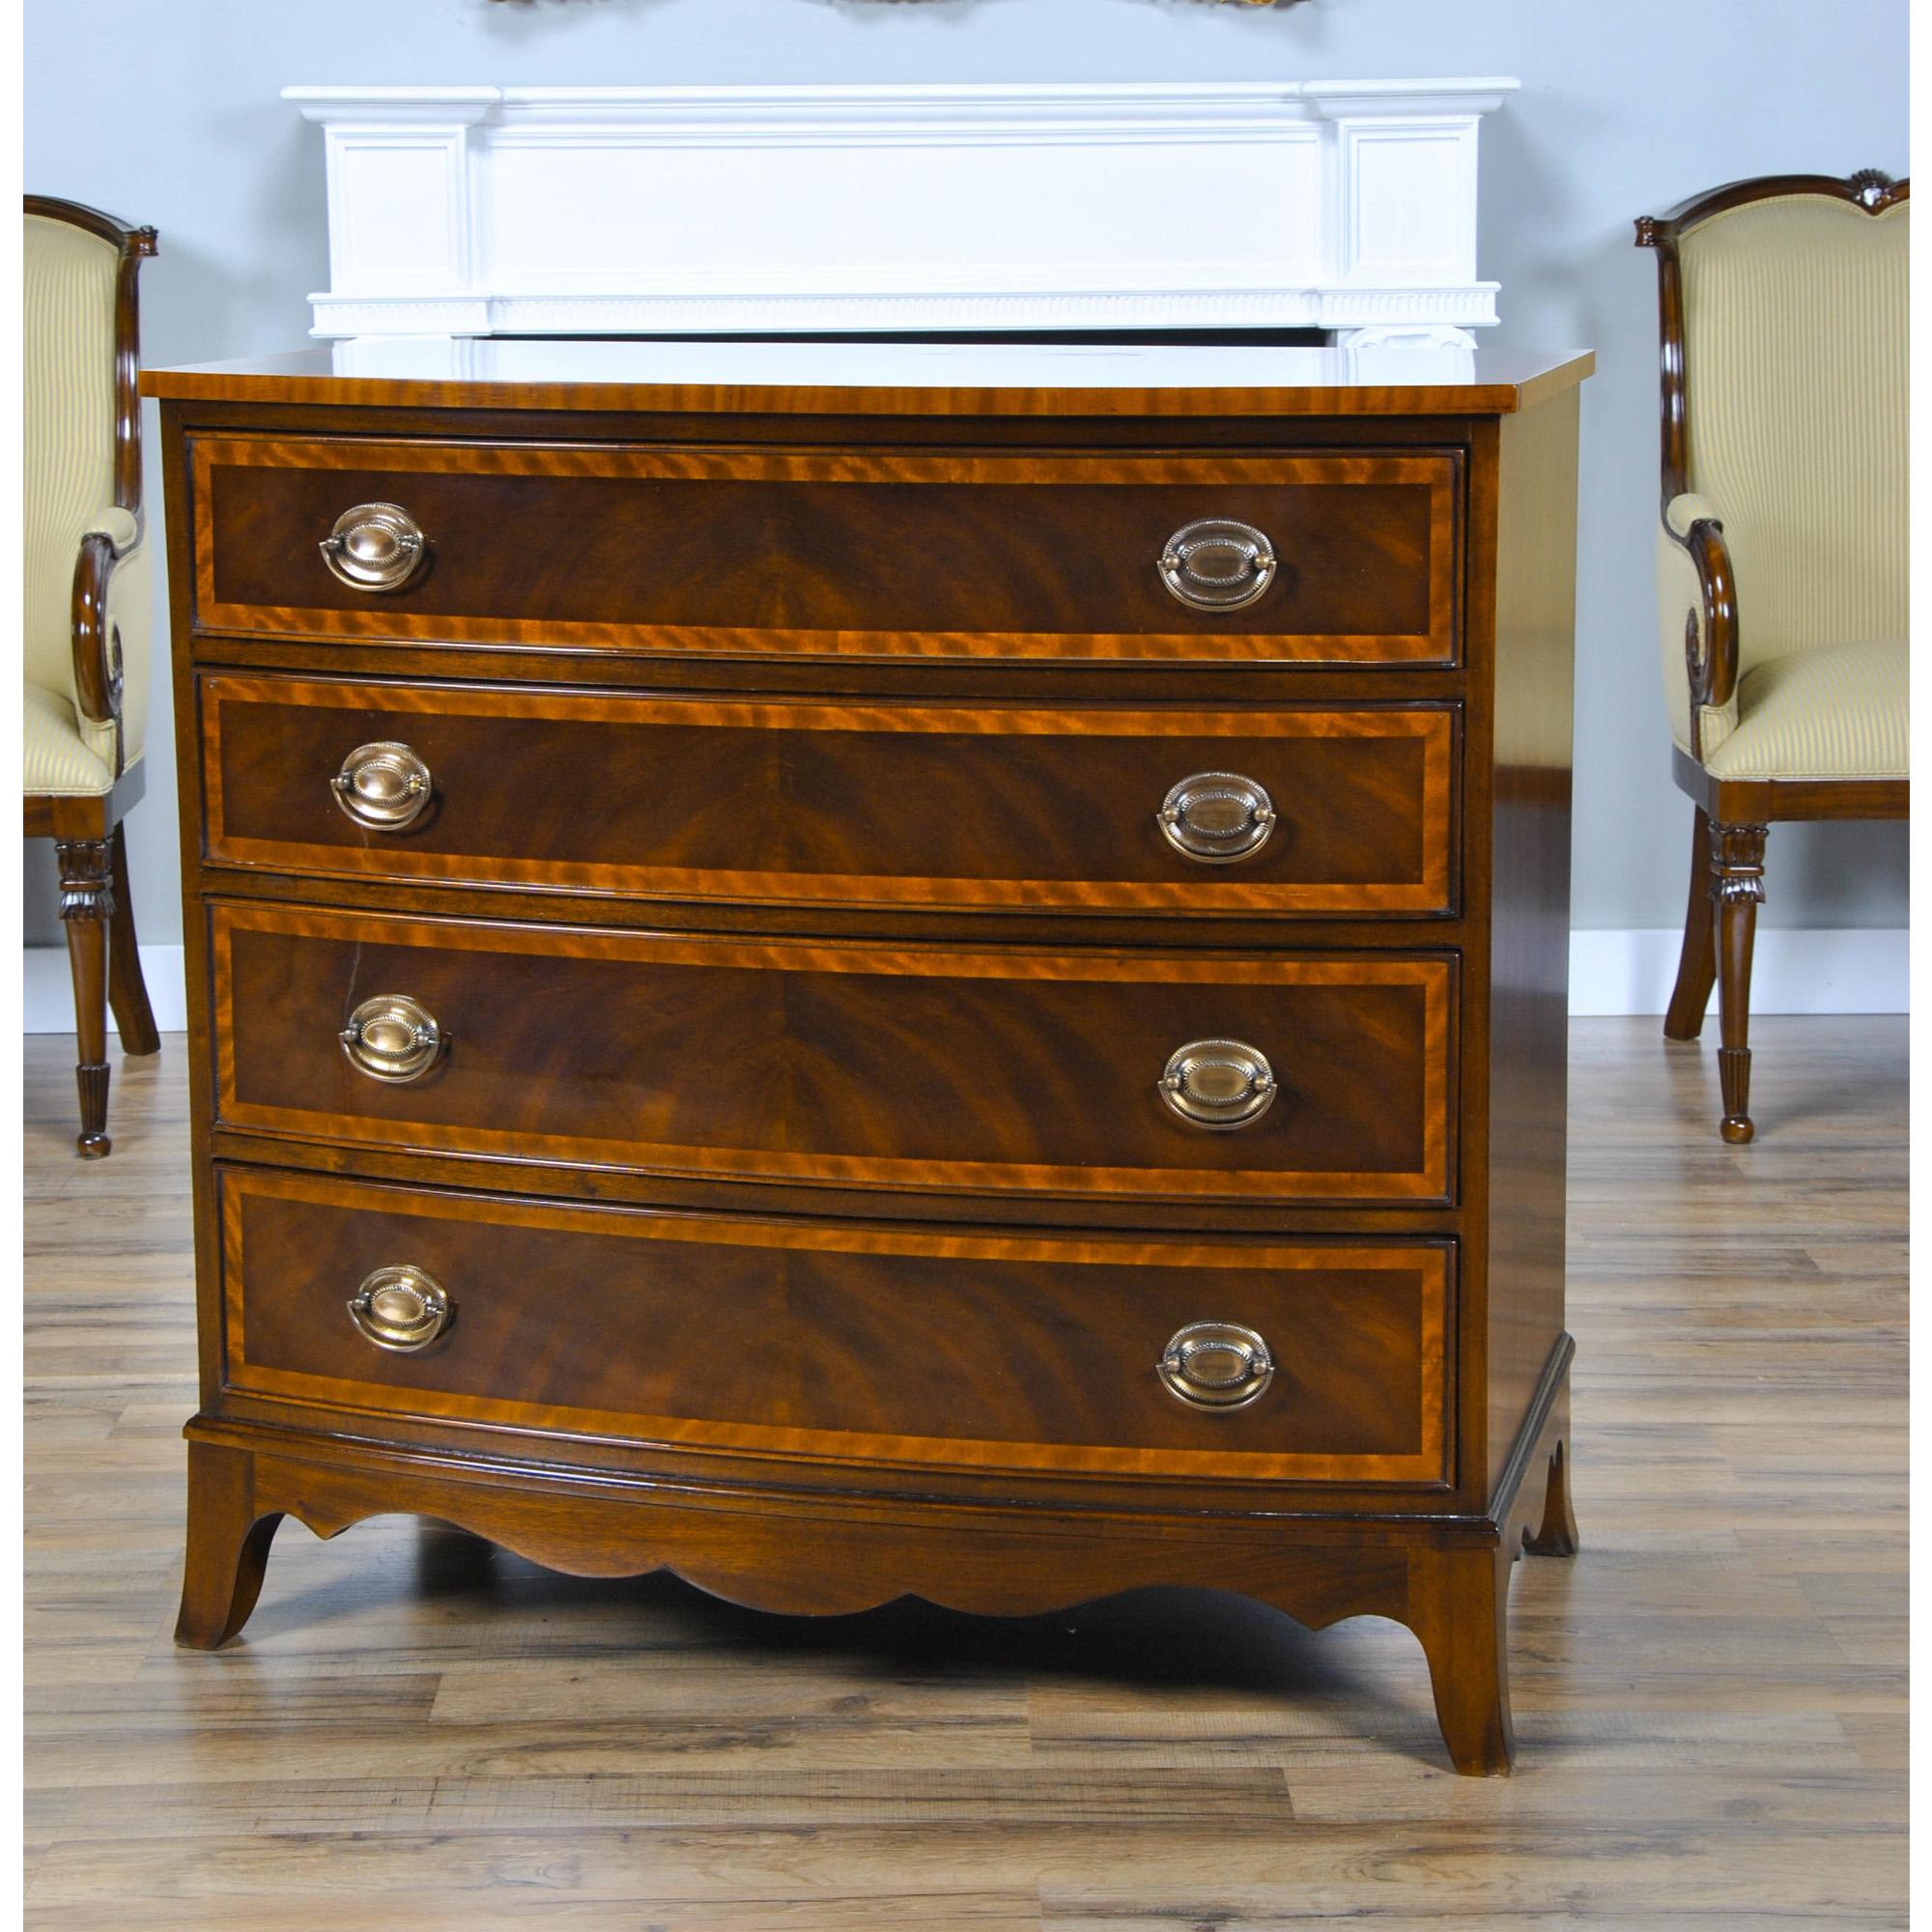 A gorgeous bow fronted Mahogany Banded Hepplewhite Chest of graduated drawers that features great quality mahogany and satinwood banding throughout. Elegant design and great materials combine with dovetailed drawers to create an ideal piece that is